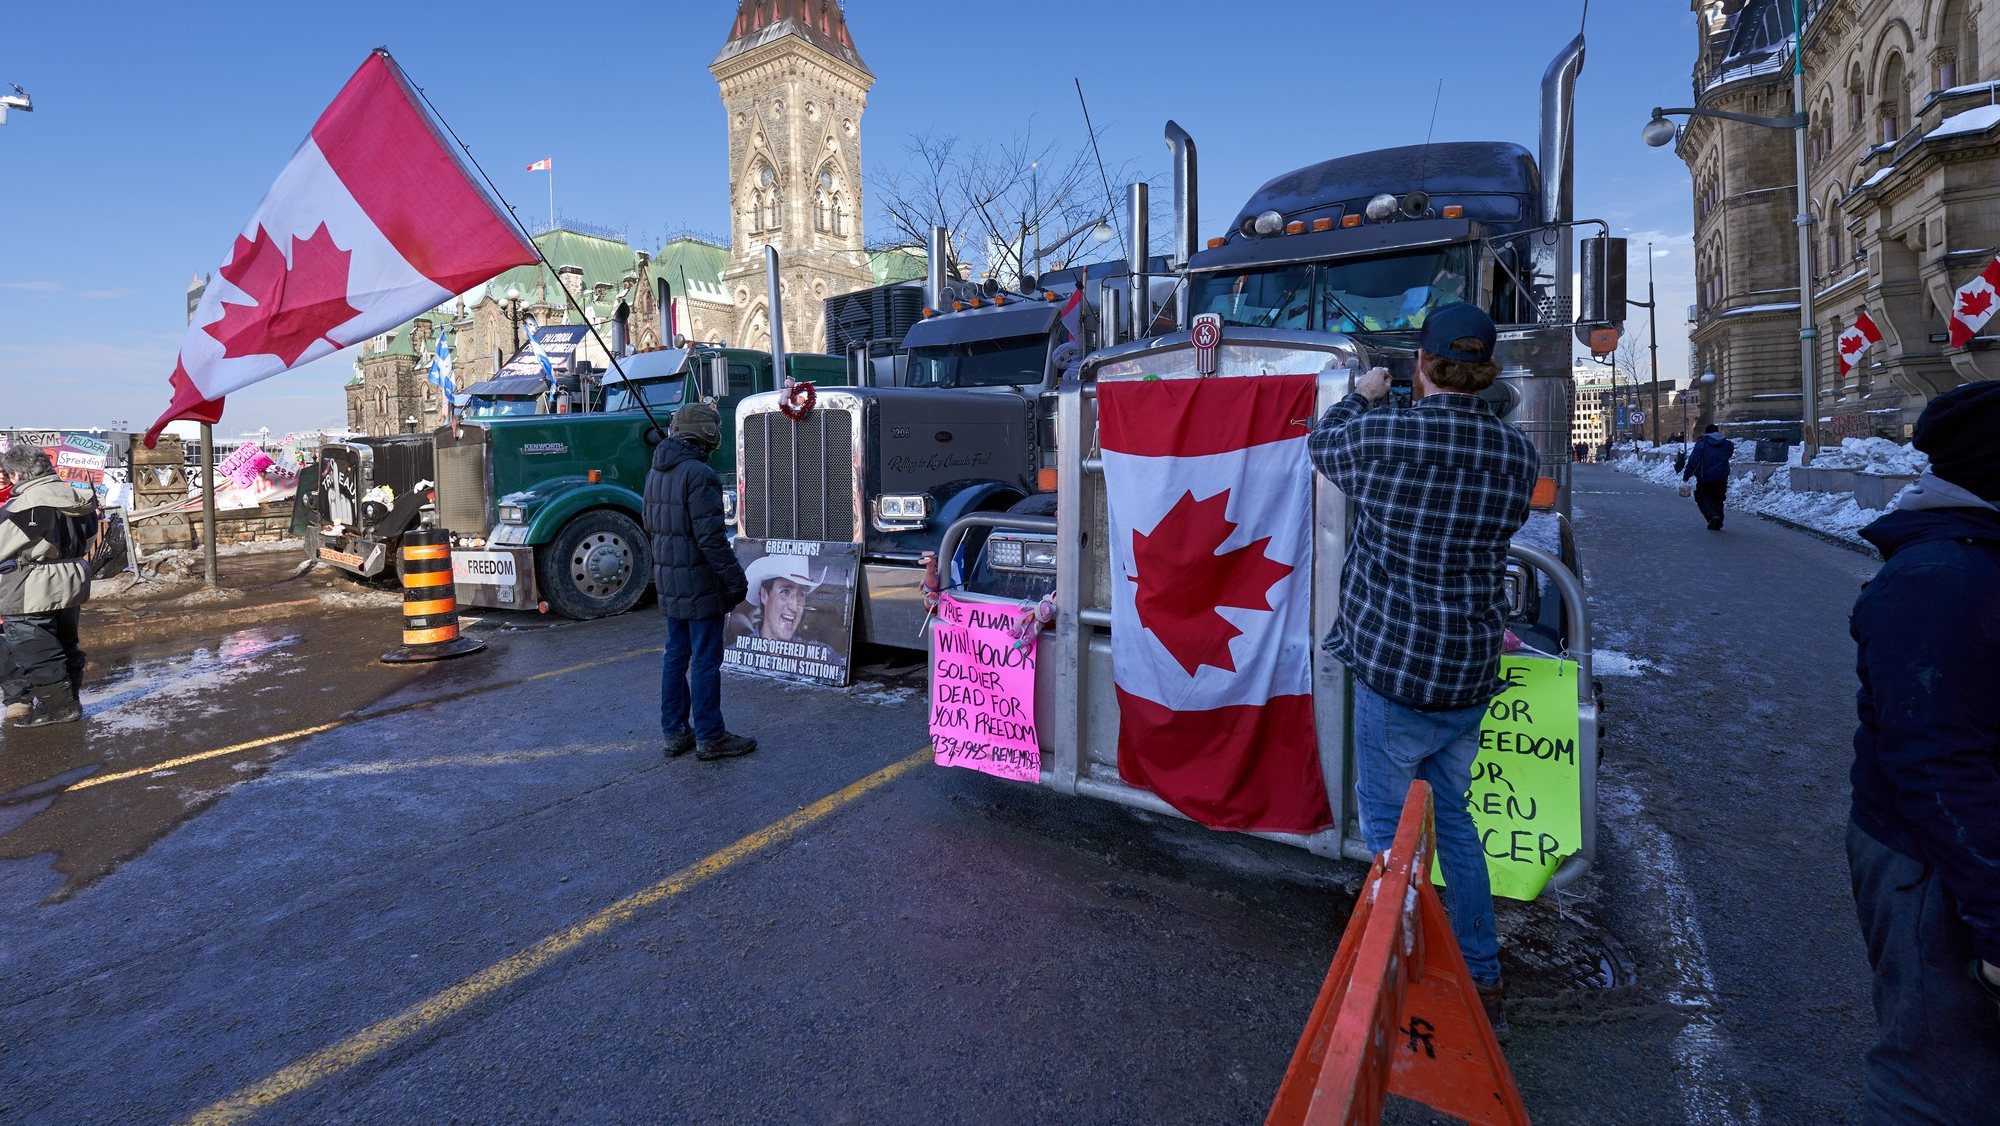 epa09736445 Truckers continue their sit-in near the Canadian parlement hill, after the mayor of Ottawa has declared a state of emergency in the Canadian capital after a 10-day-long protest by truck drivers over Covid-19 restrictions that has gridlocked its city center, in Ottawa, Canada, 07 February 2022. Truckers protested against the mandate by the Canadian government that truckers be vaccinated to return to Canada, and was joined by other opponents of the Canadian Prime Minister. Policemen from Ottawa city, Ontario, and the Federal Royal Canadian Mounted Police (RCMP) are deployed.  EPA/ANDRE PICHETTE